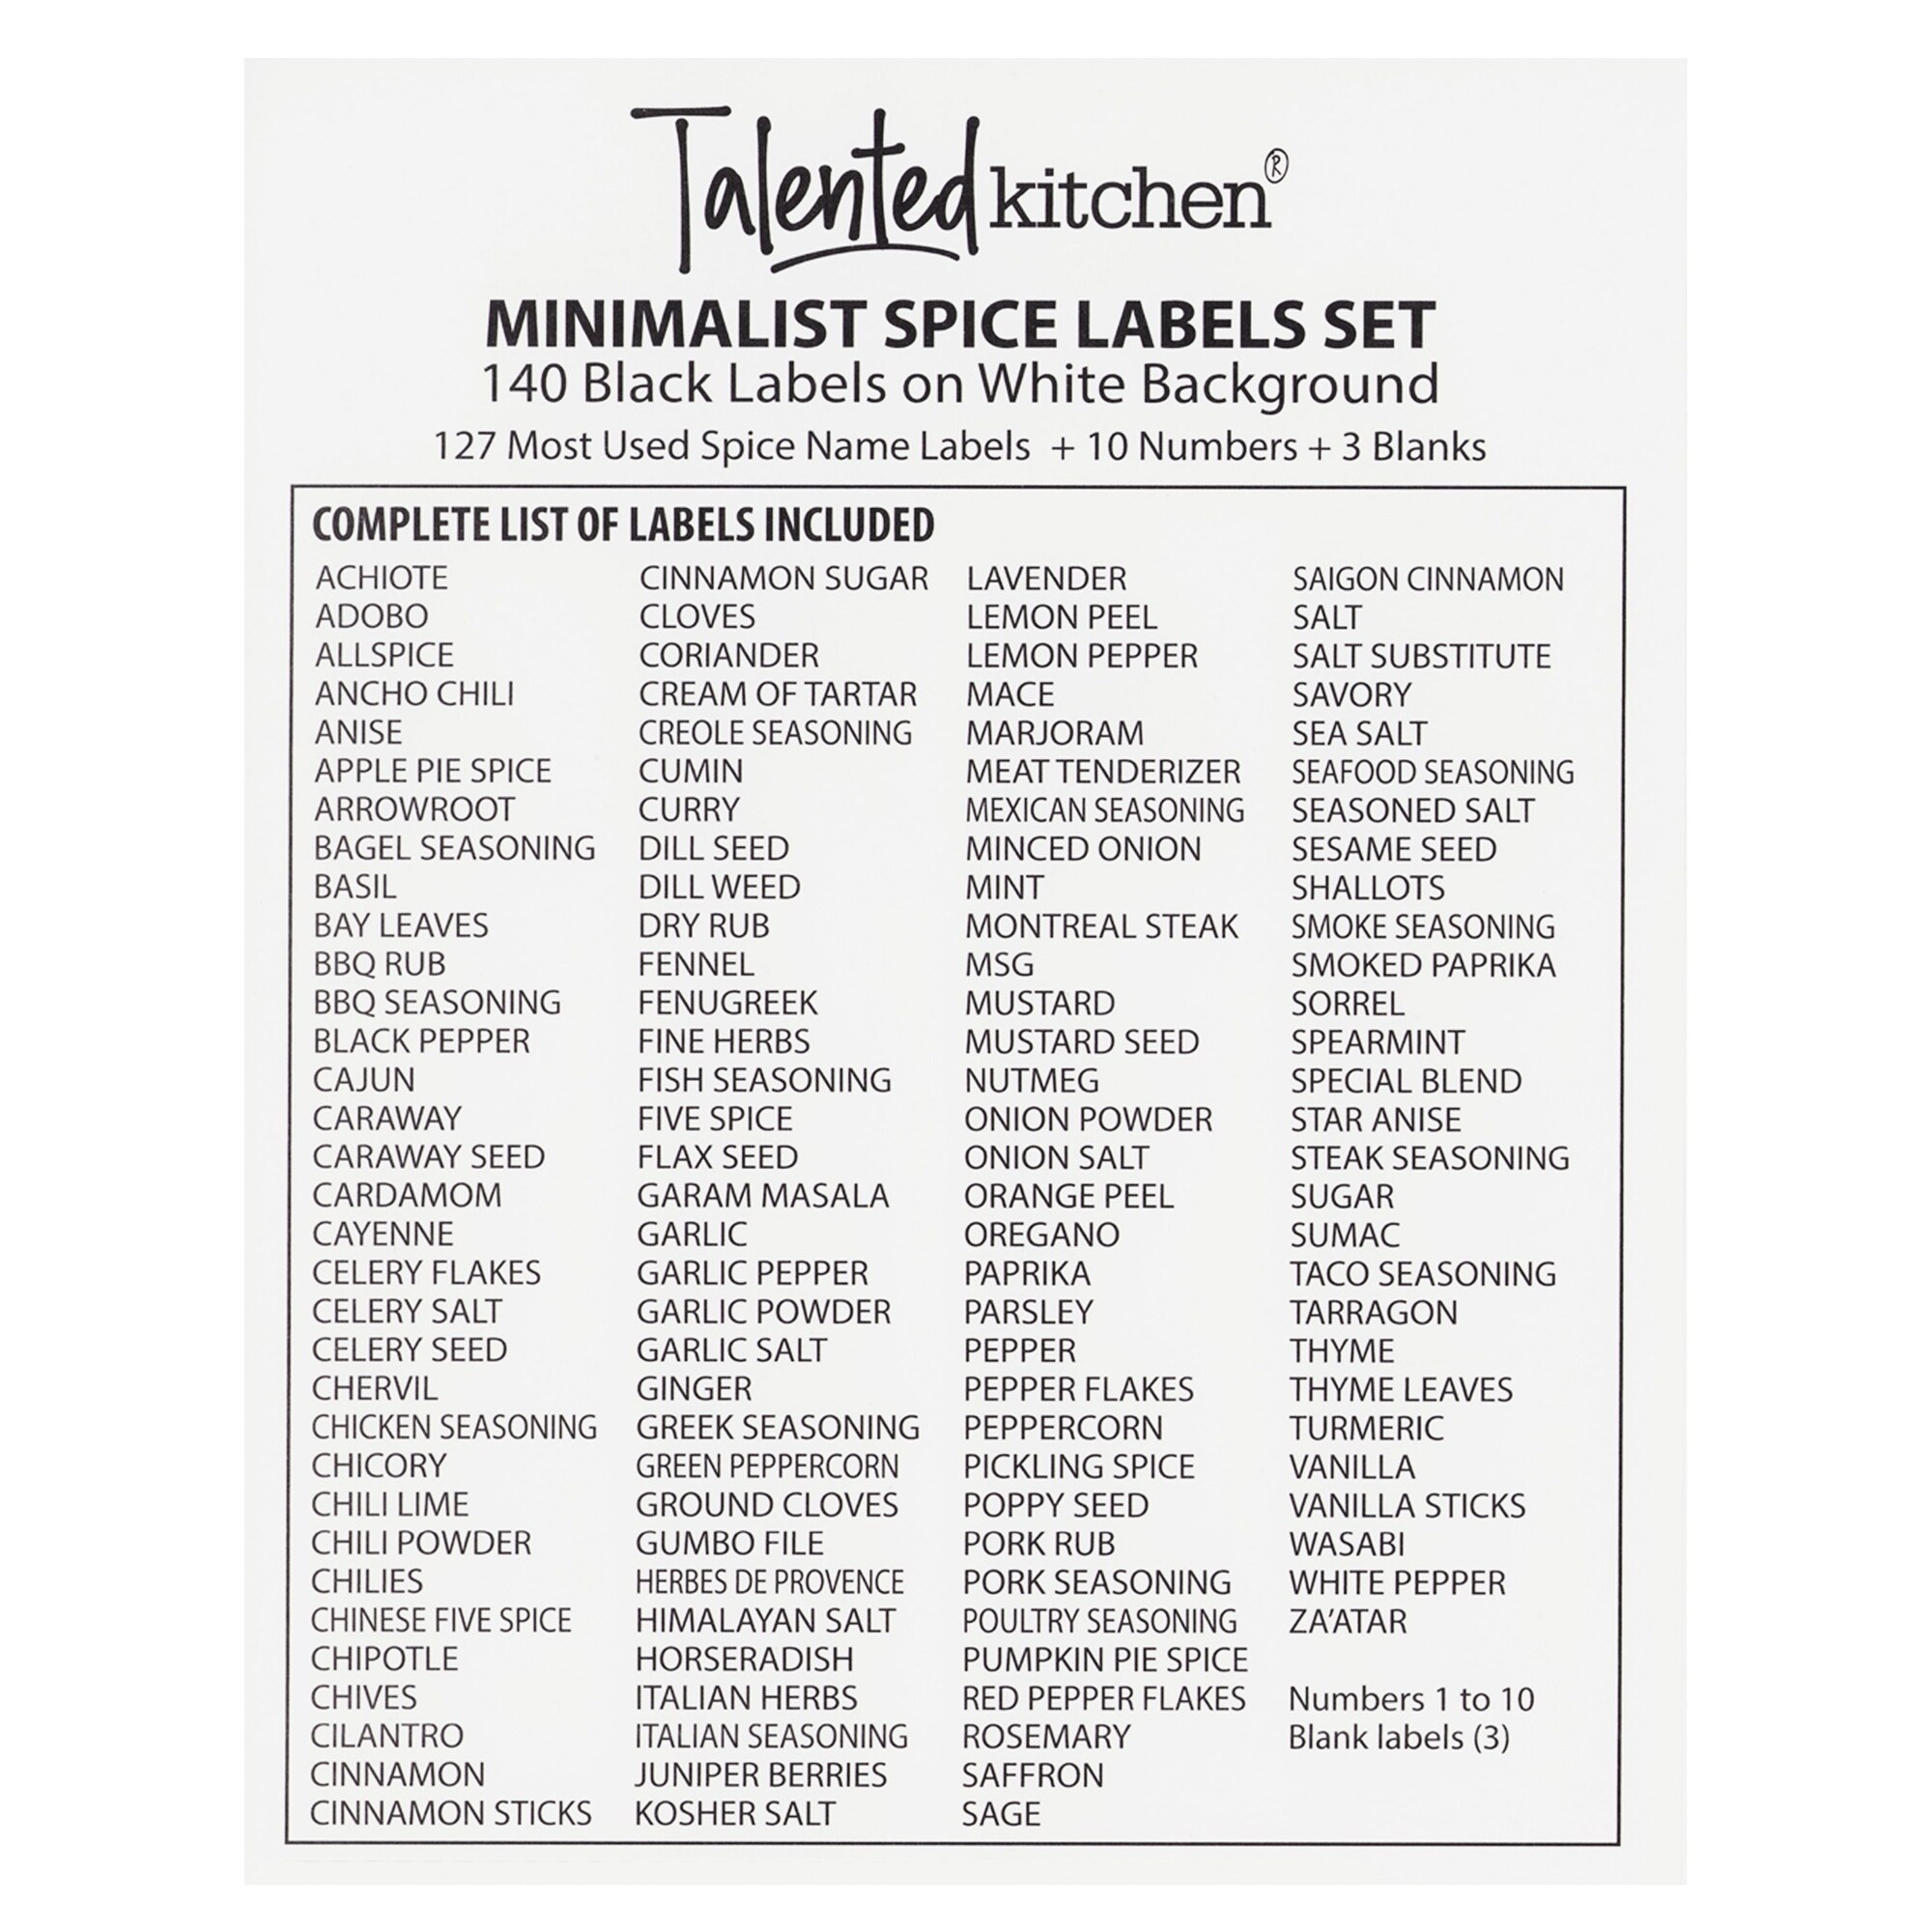 Talented Kitchen 145 Spice Labels Stickers, Clear Spice Jar Labels  Preprinted for Seasoning Herbs, Kitchen, Spice Rack Organization, Water  Resistant